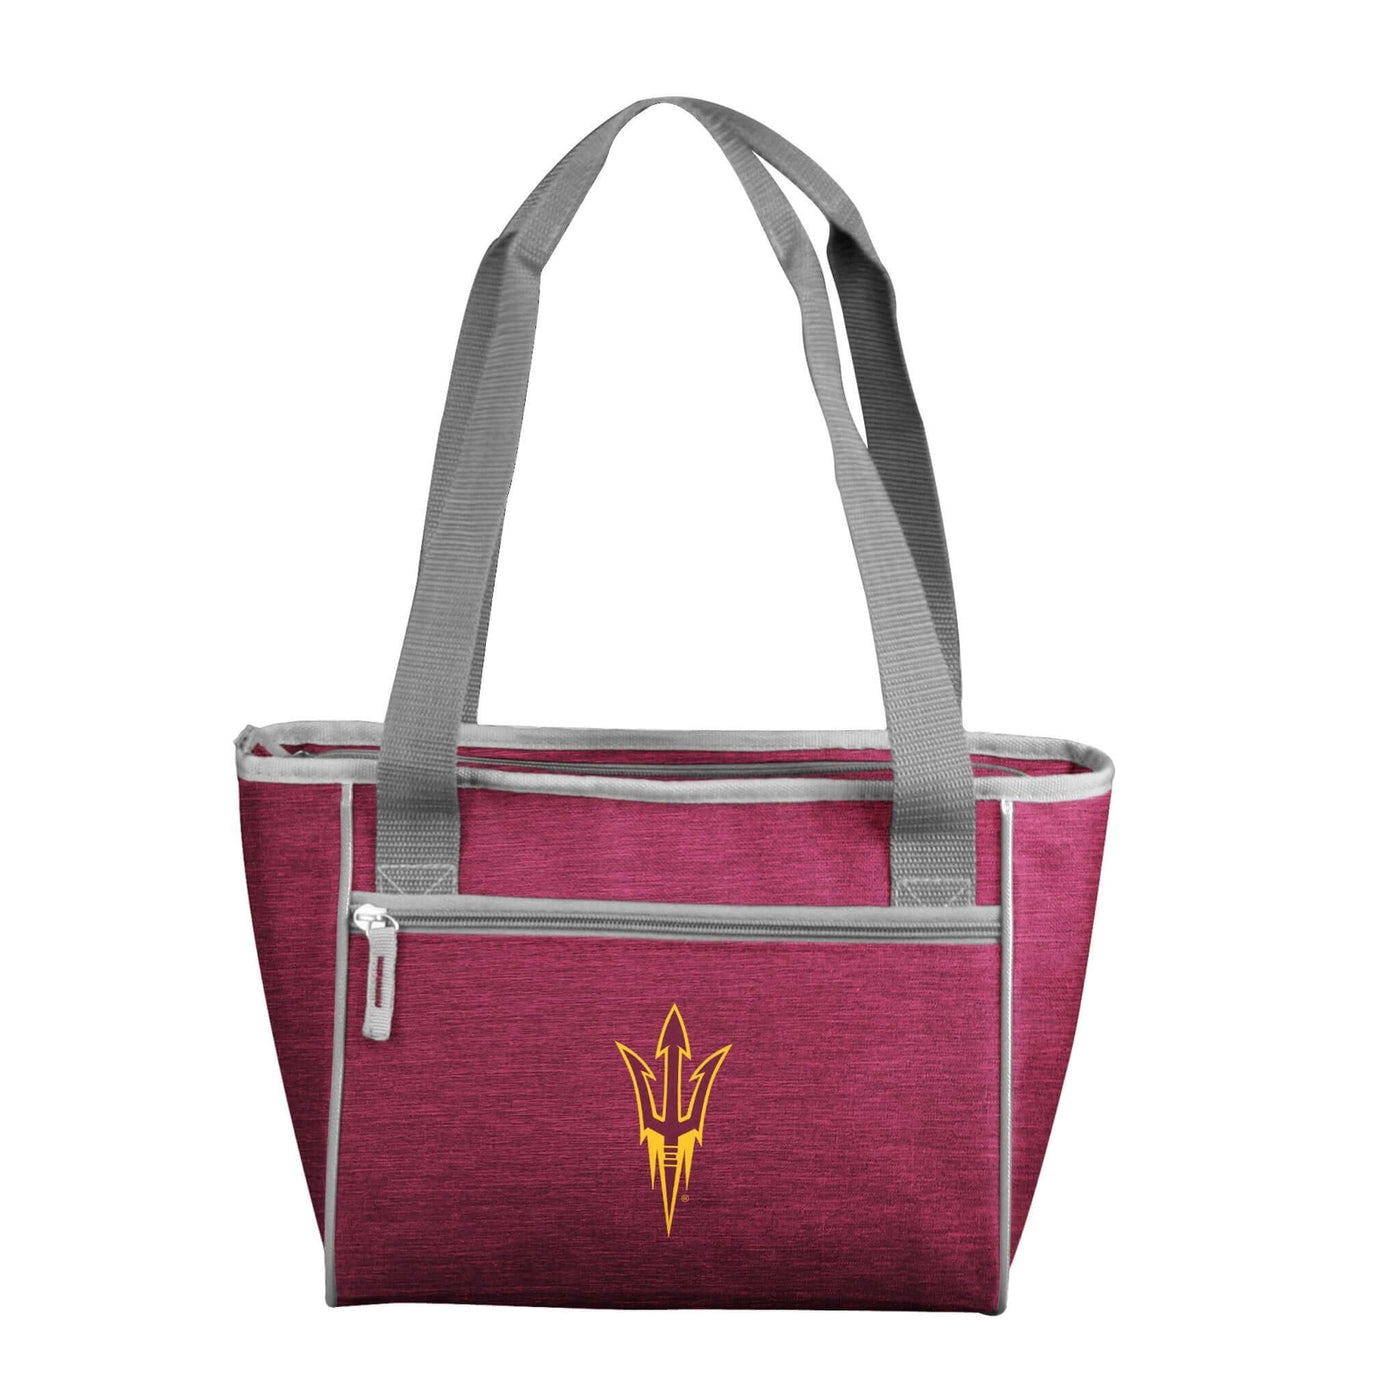 AZ State Crosshatch 16 Can Cooler Tote - Logo Brands